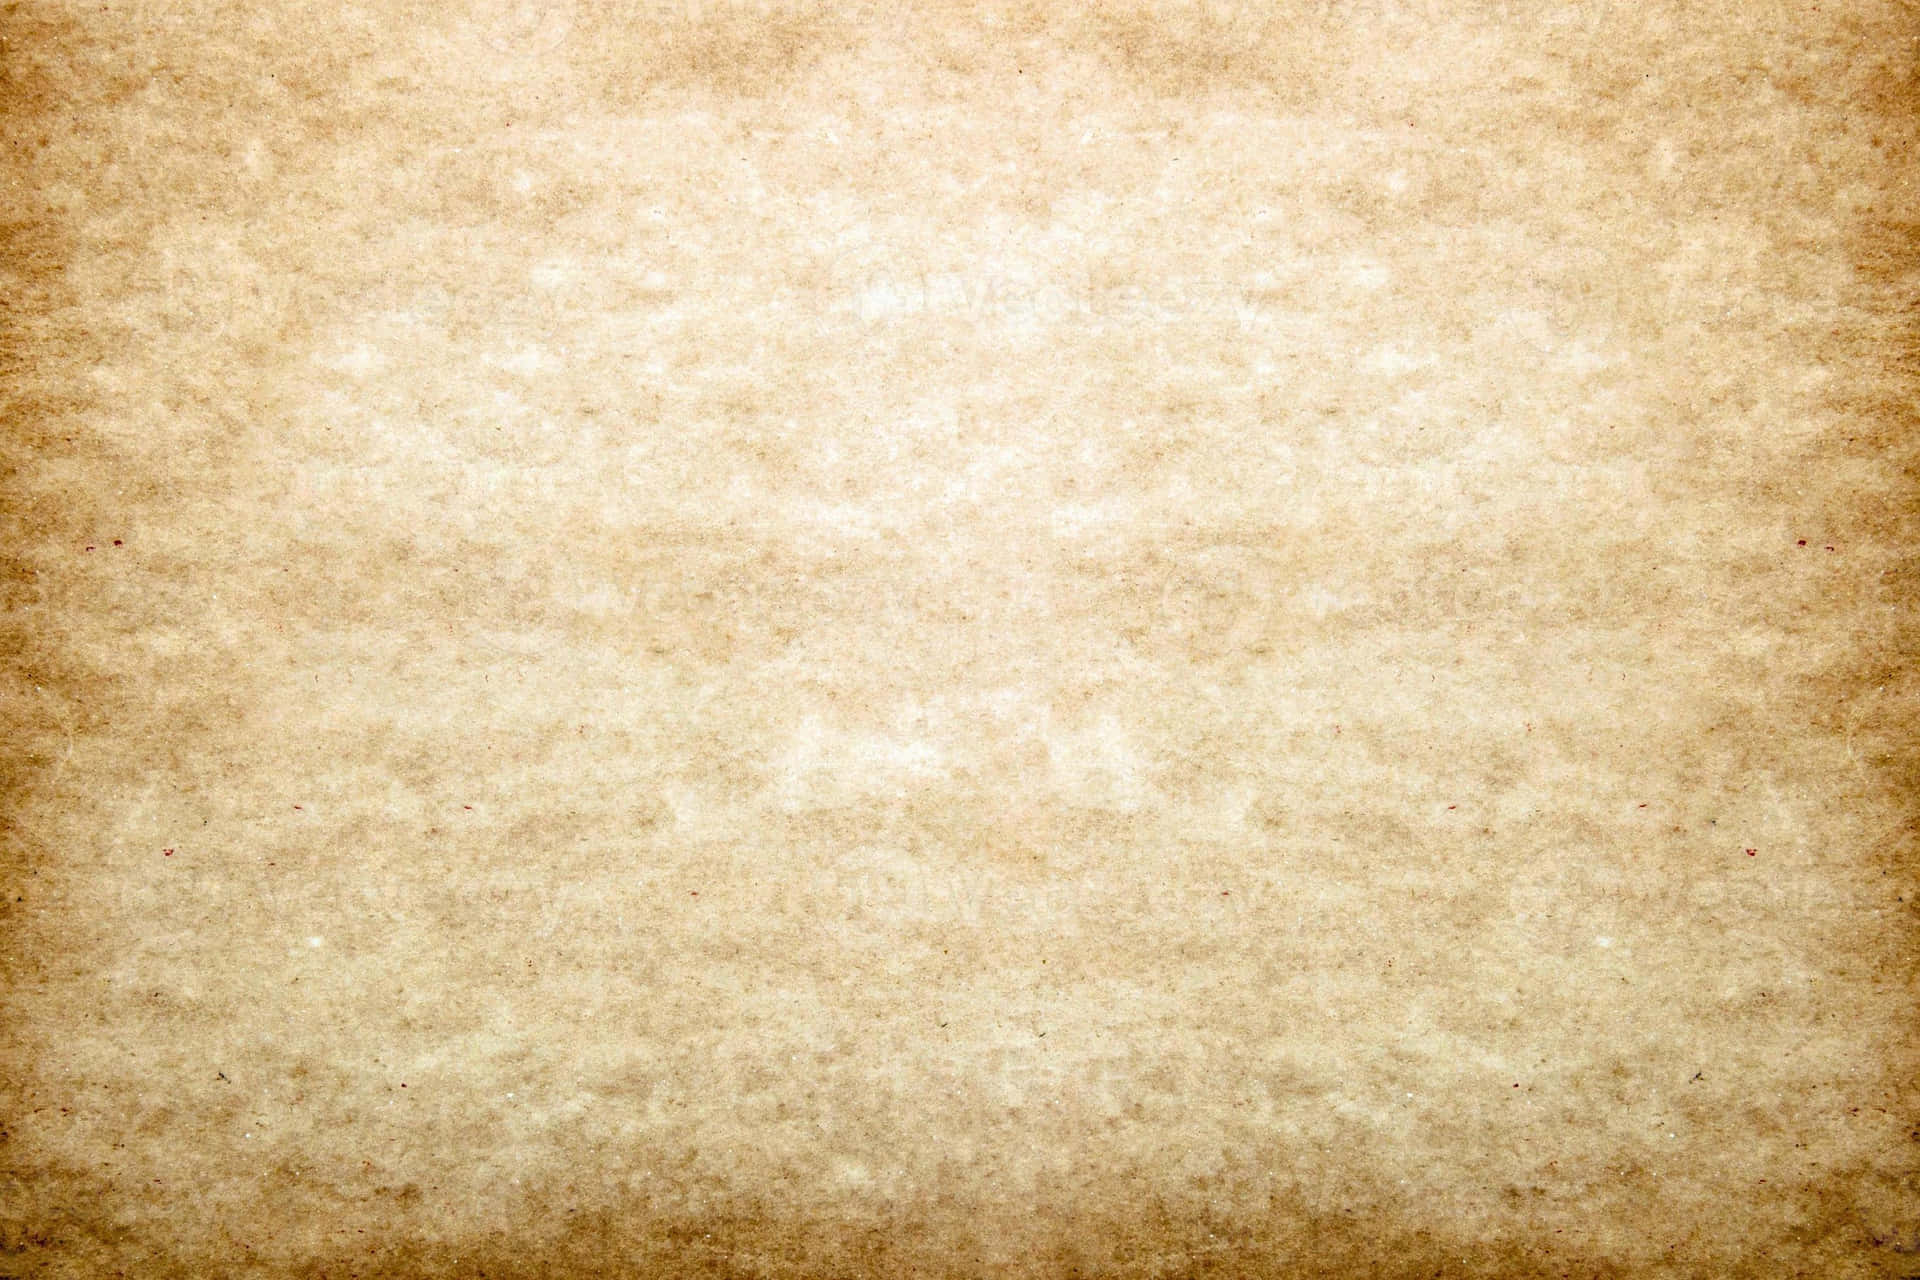 A Beige Paper Background With A Brown Texture